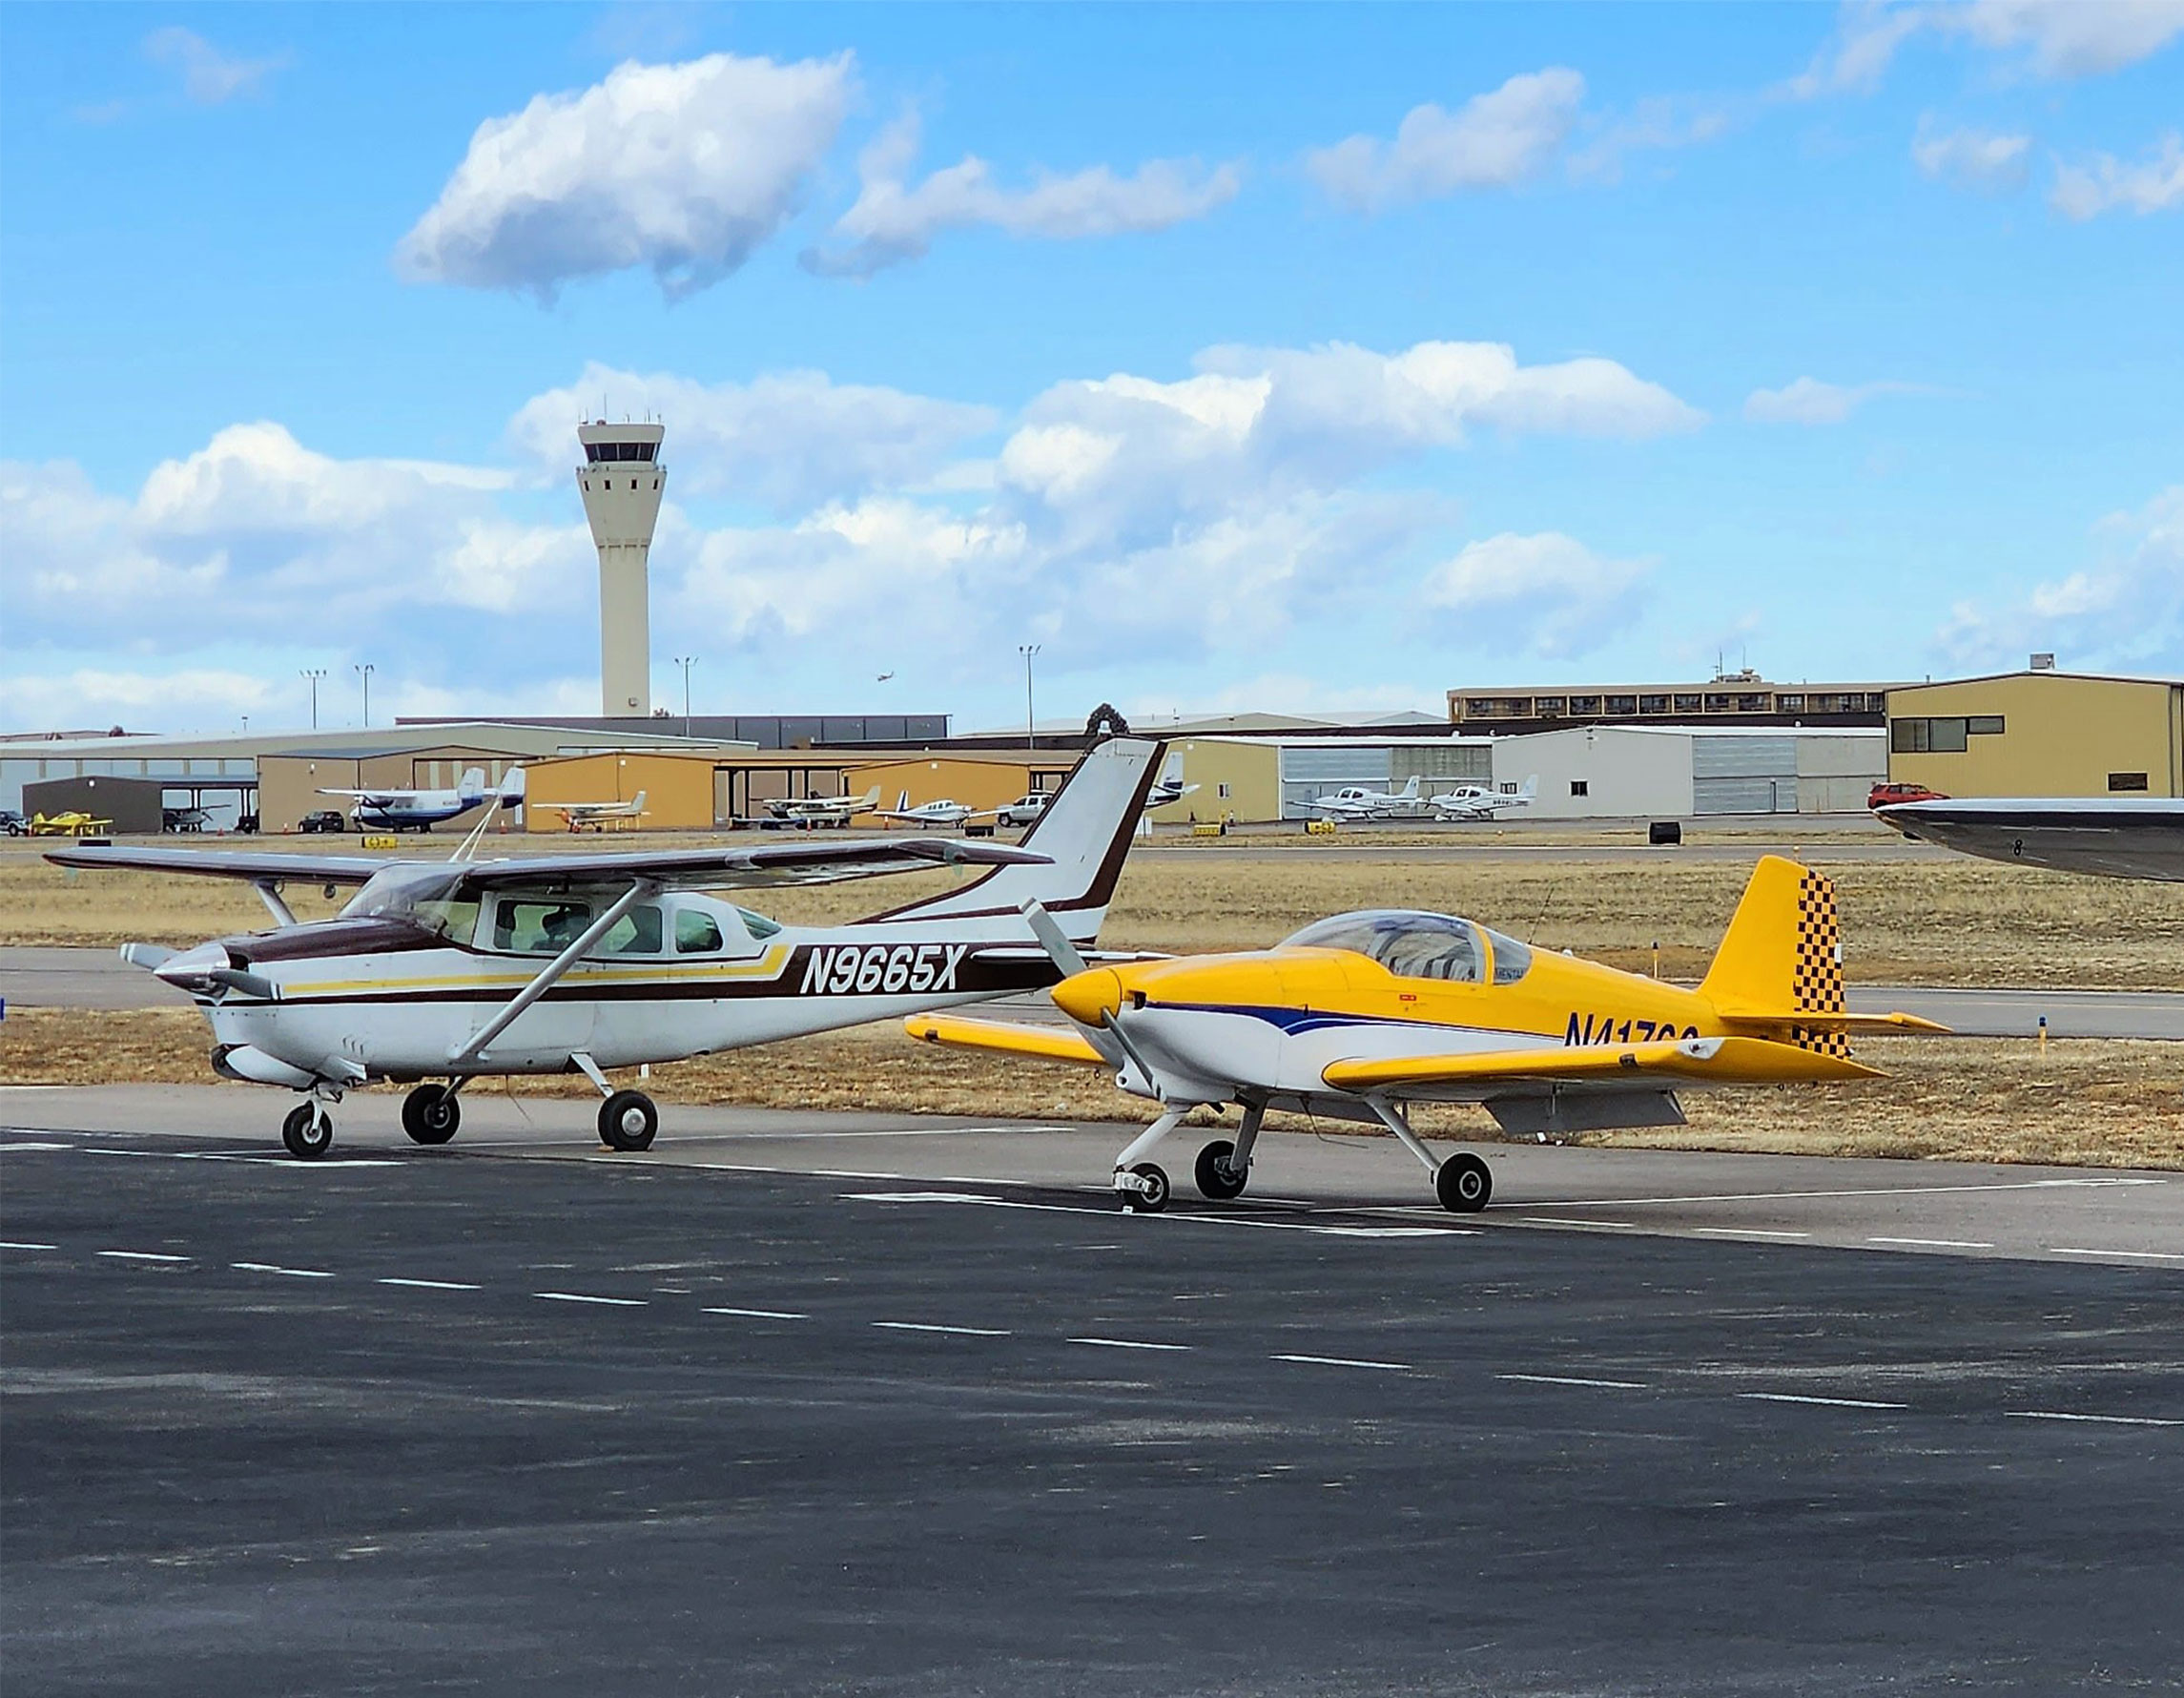 Two aircraft on the ramp at Exploration of Flight